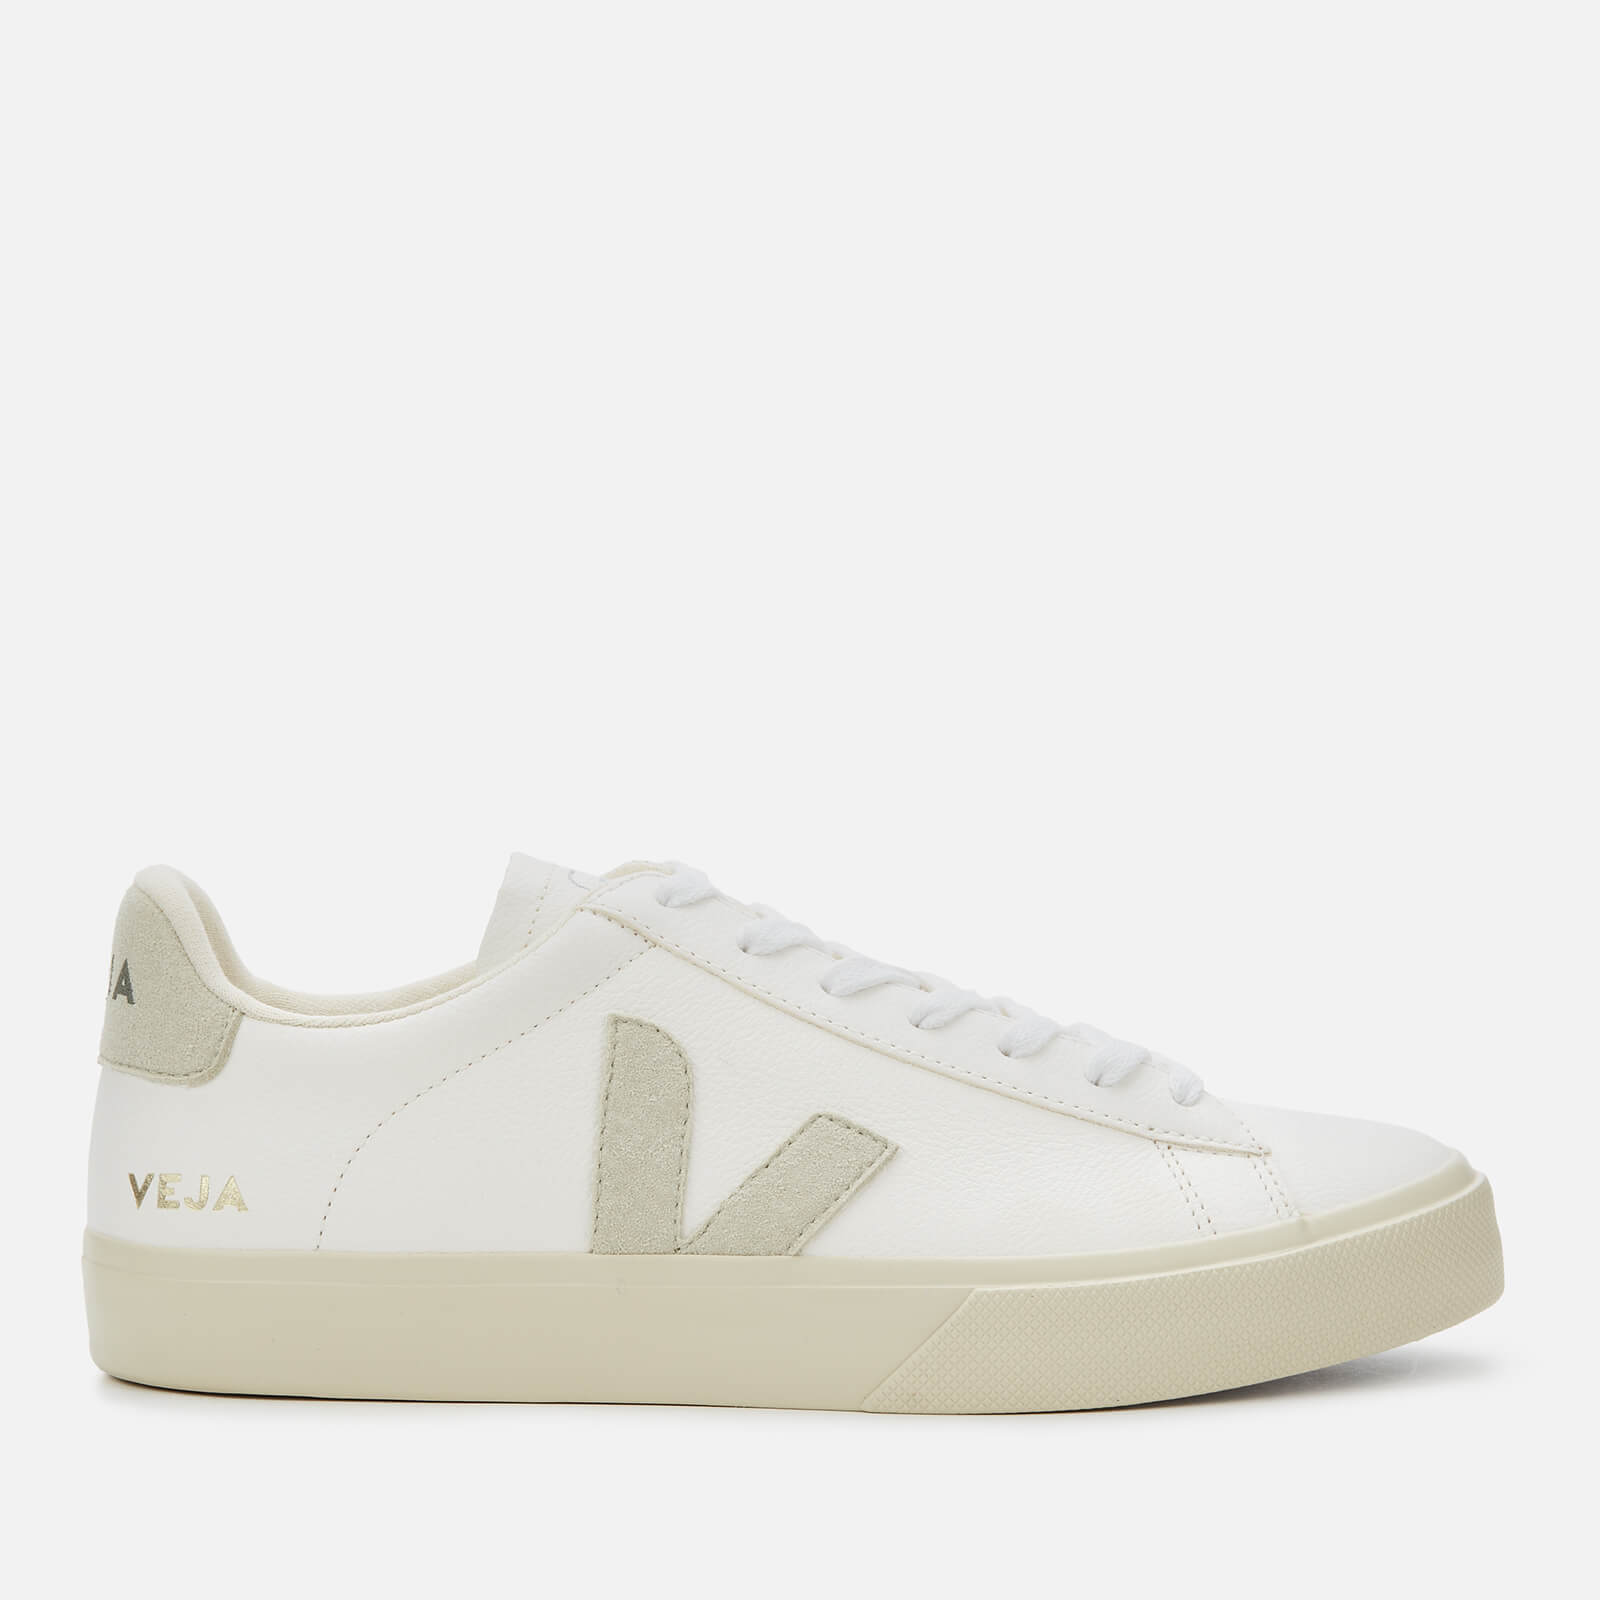 Veja Men’s Campo Chrome Free Leather Trainers - Extra White/Natural